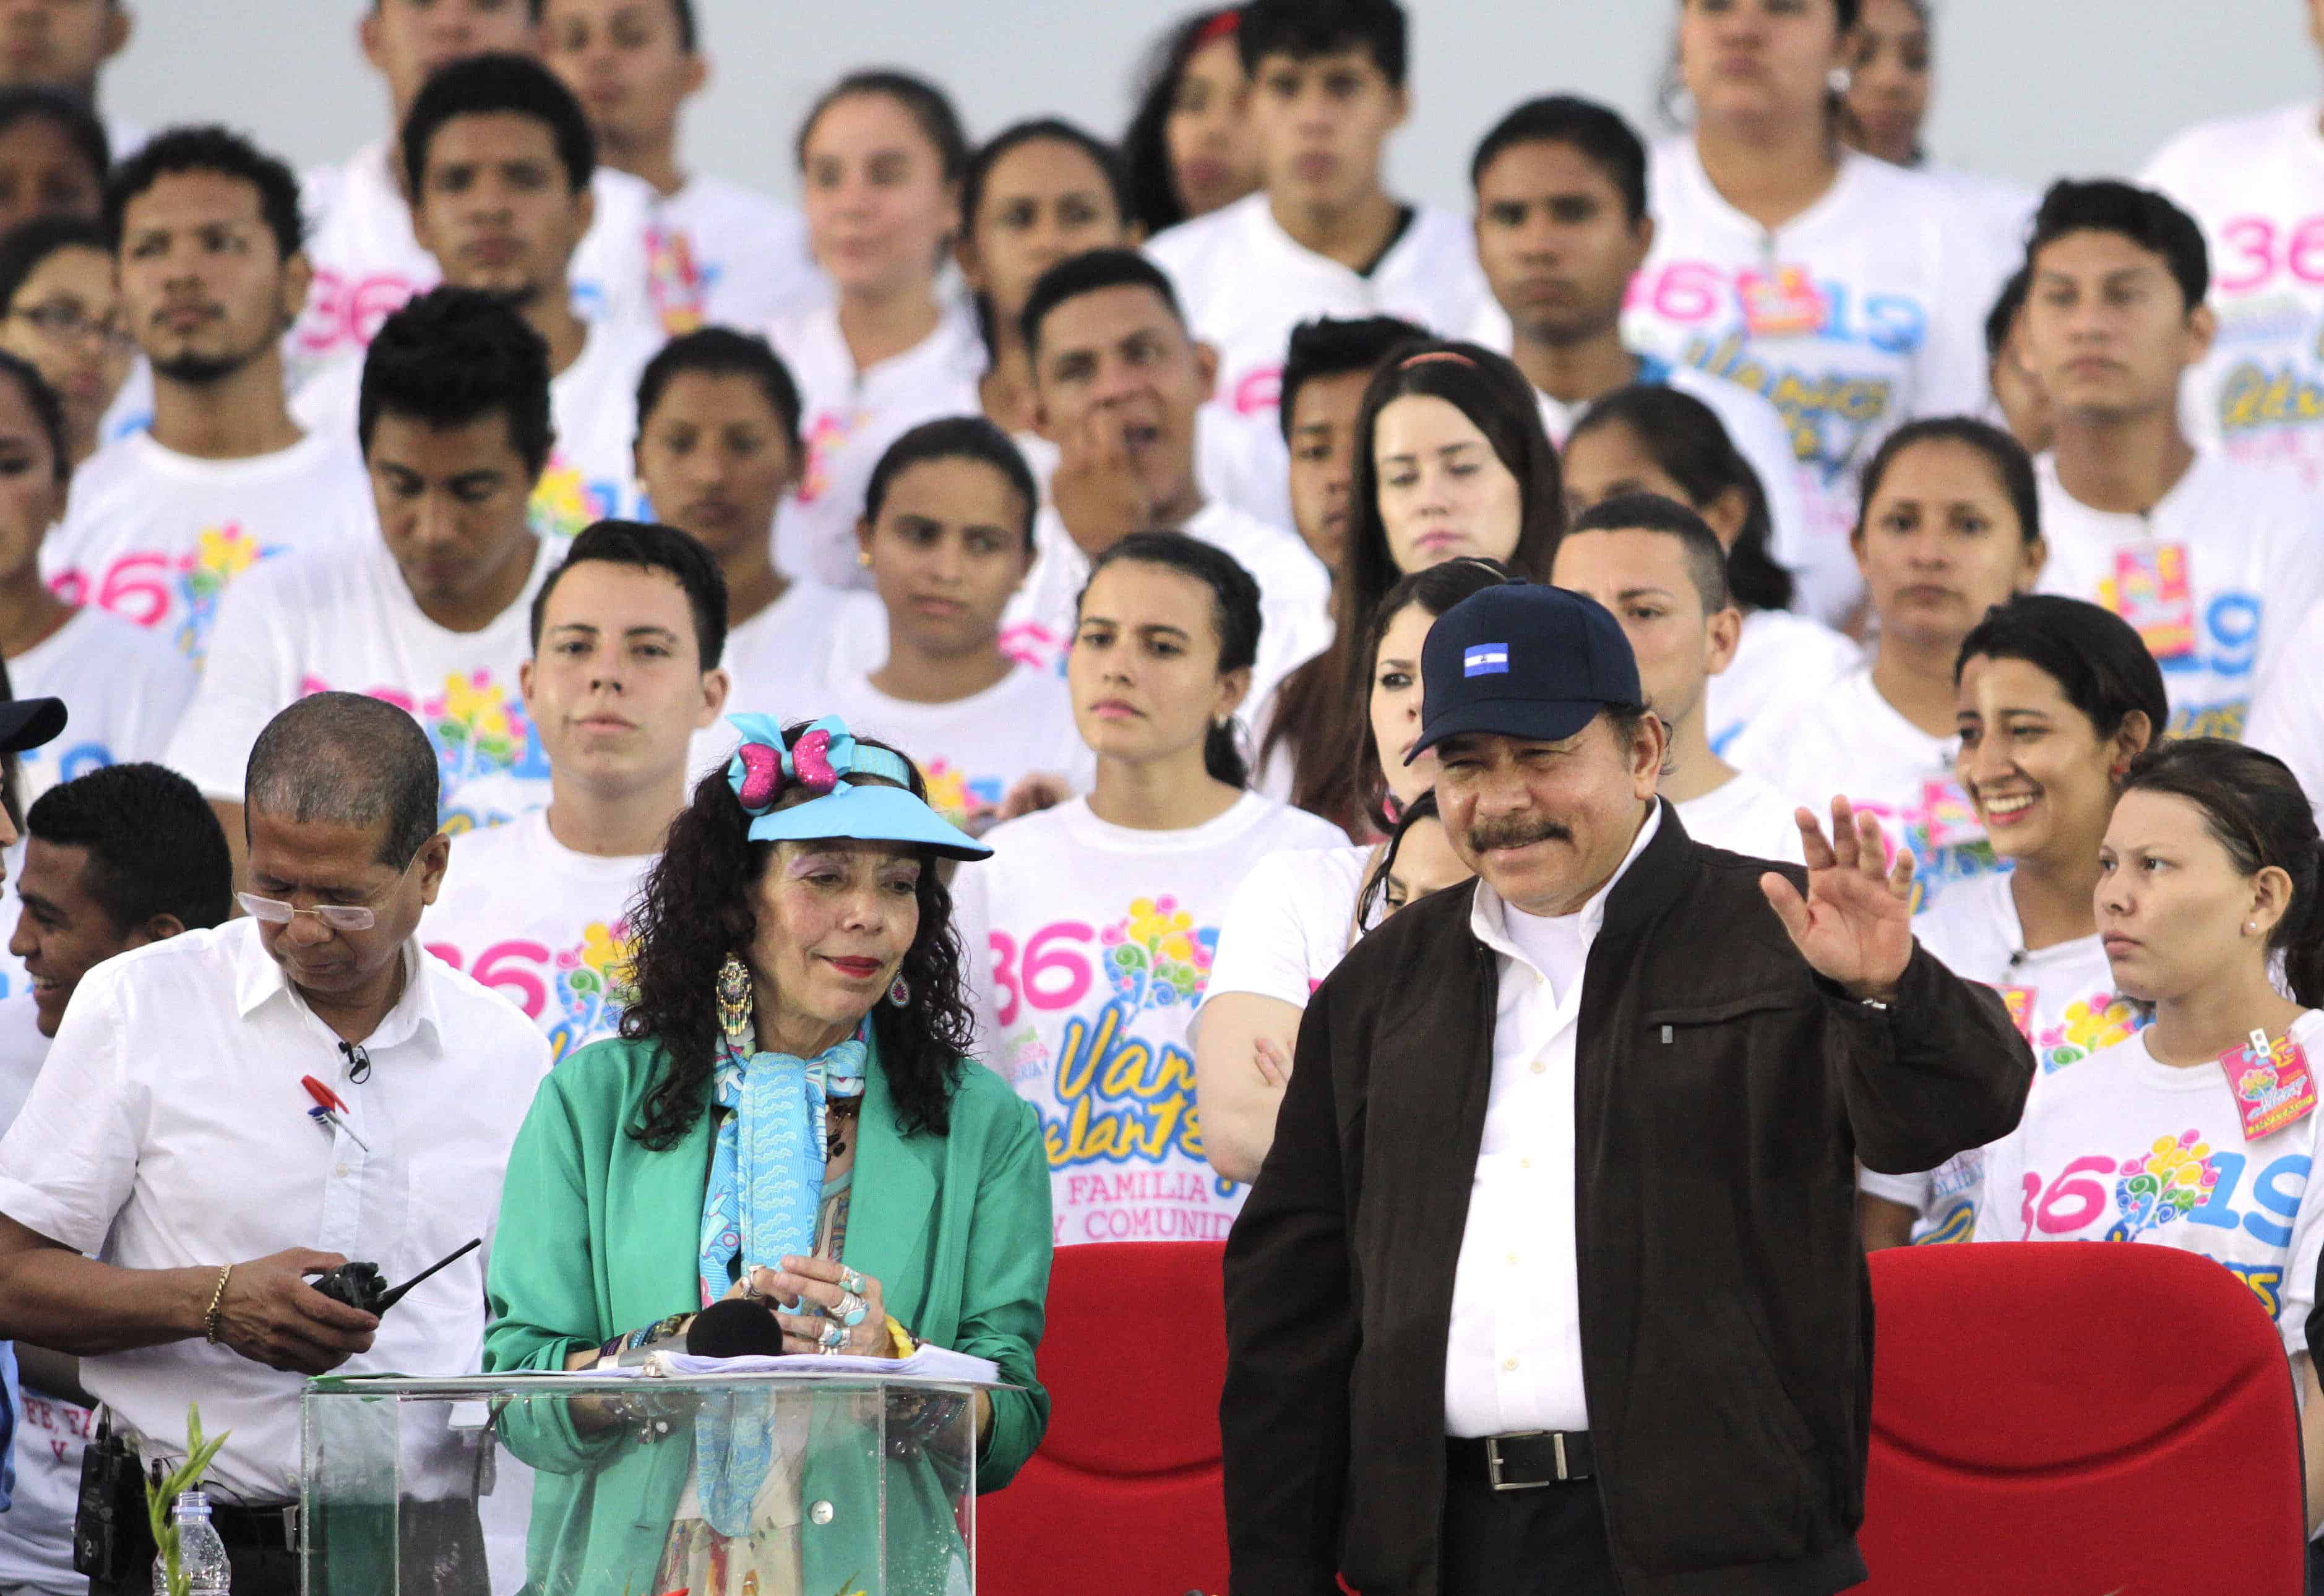 Nicaraguan President Daniel Ortega and First Lady Rosario Murillo wave to supporters during the celebration of the 36th anniversary of the Sandinista Revolution at La Fe square in Managua